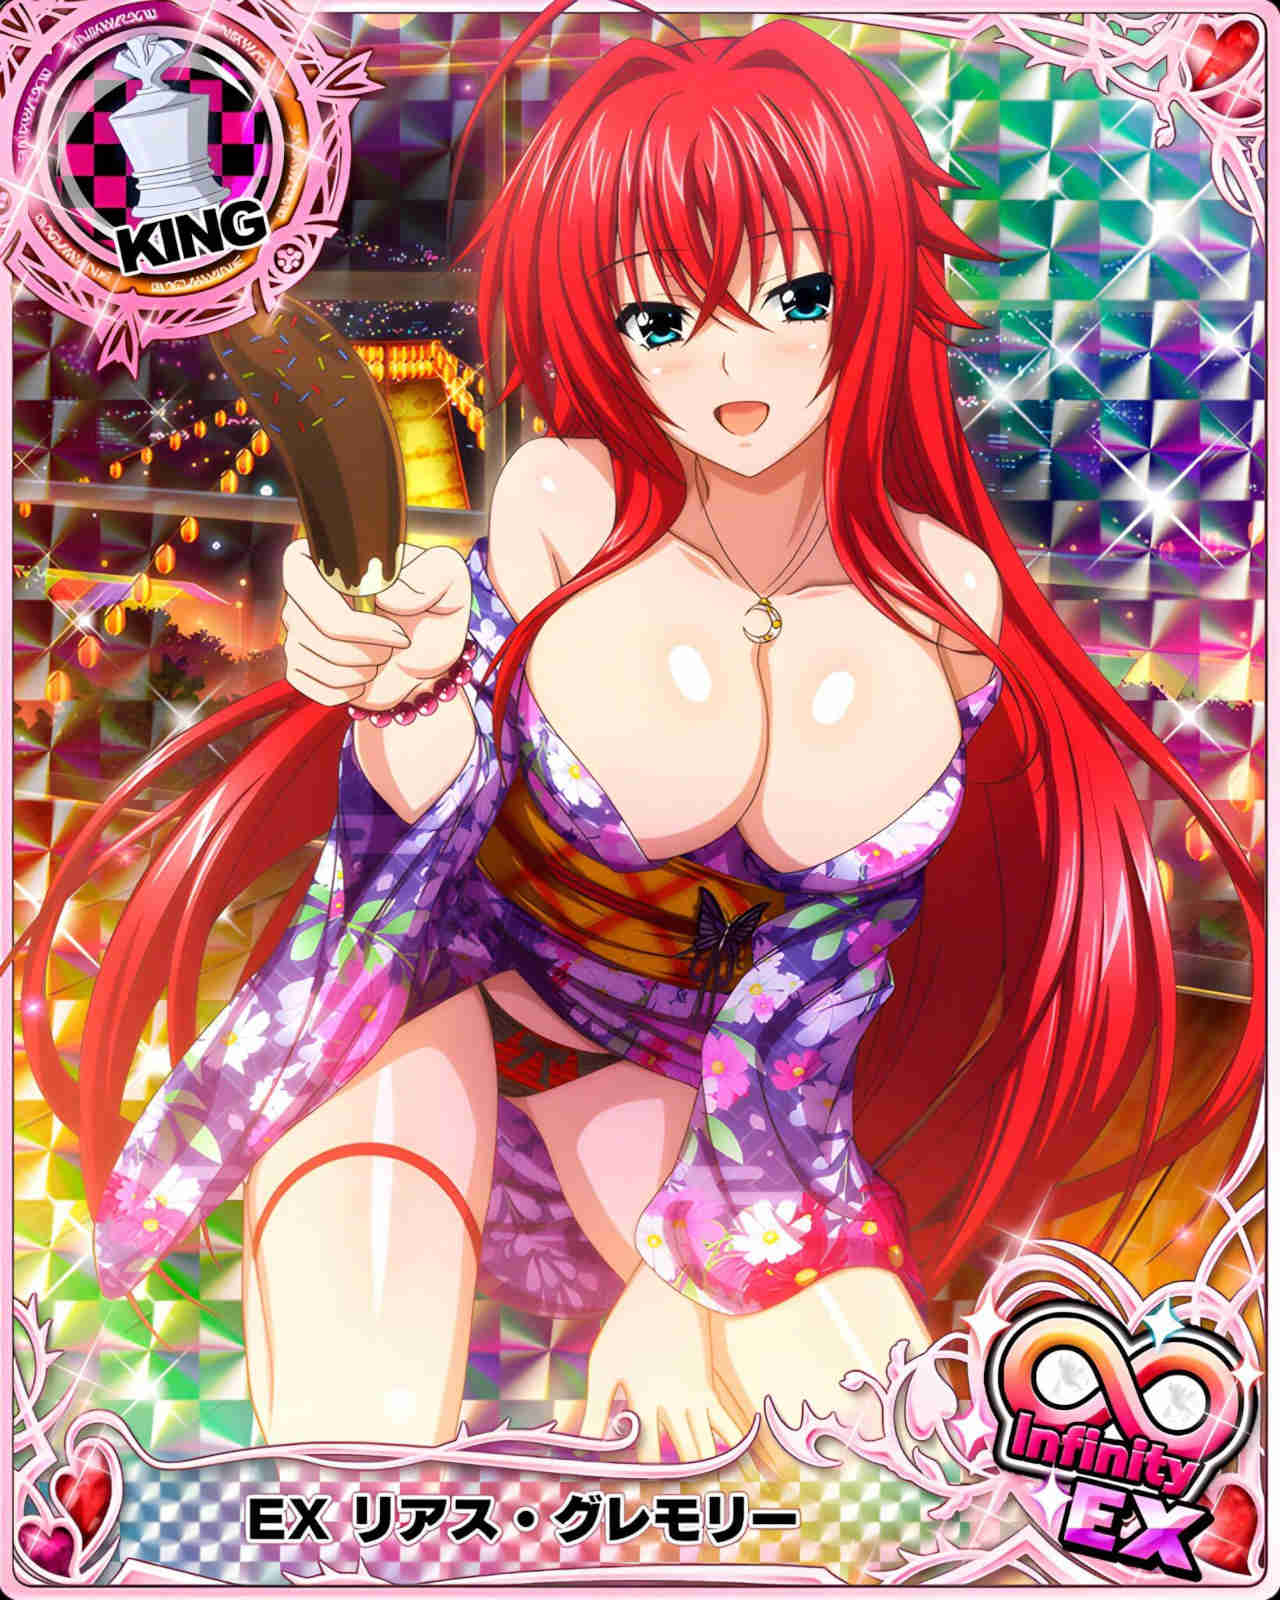 High School DxD game kicks off a new event with sexy yukatas 